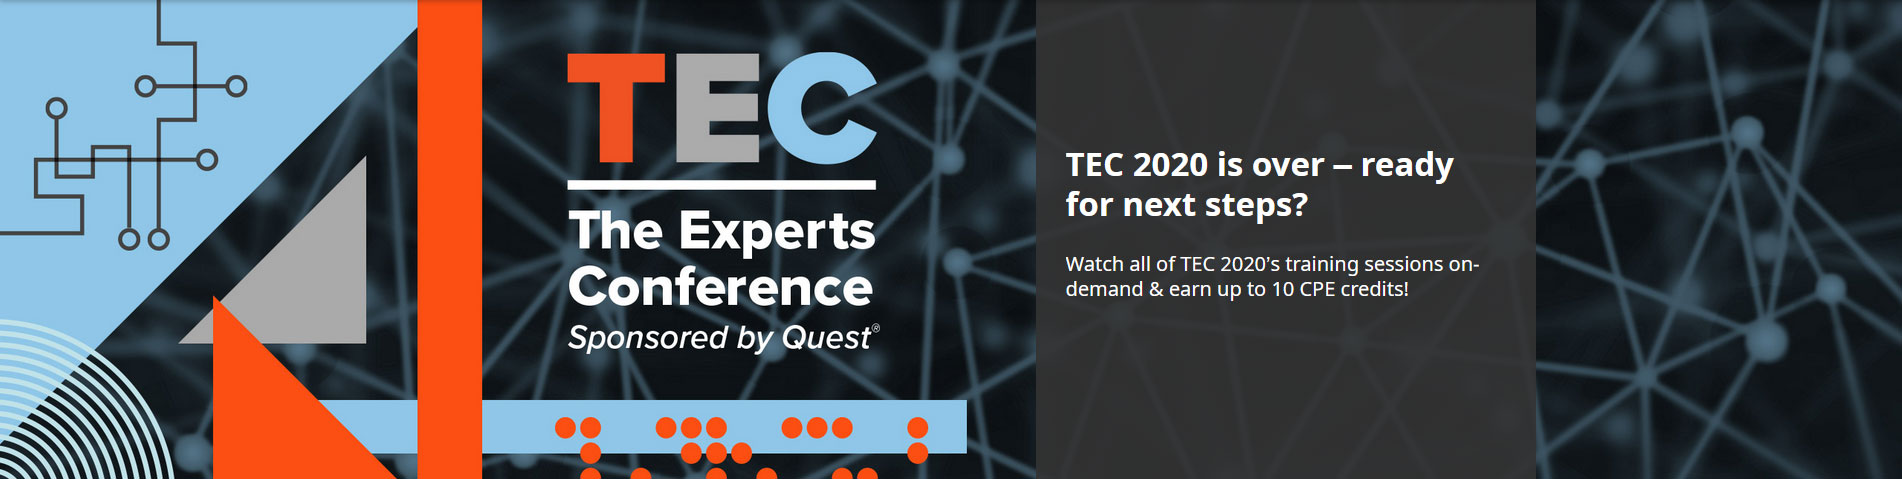 TEC The Experts Conference